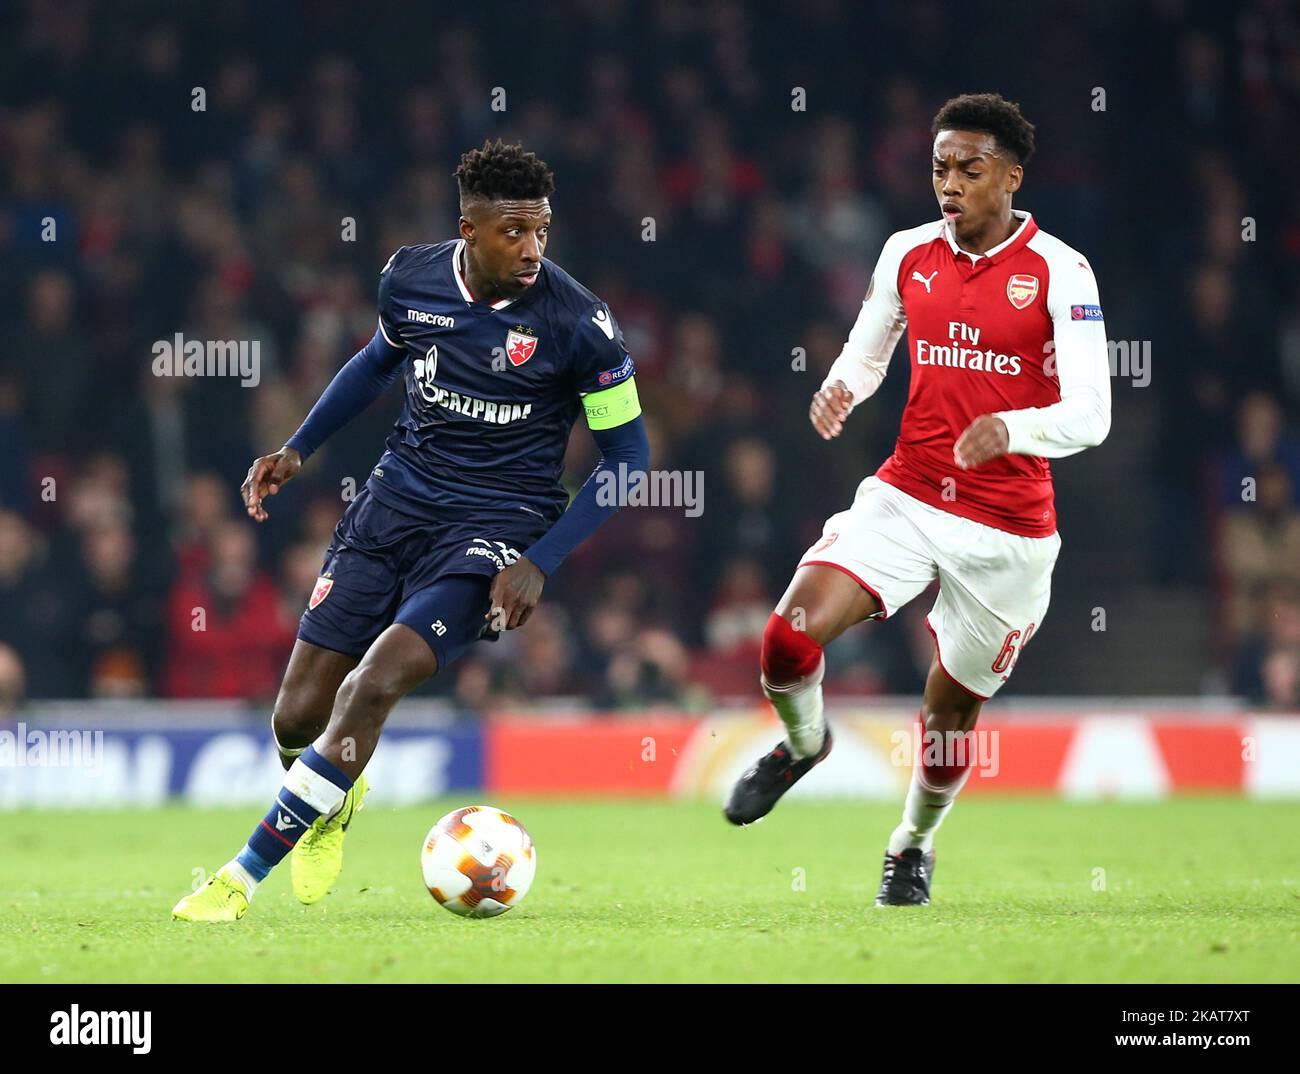 Mitchell Donald of Red Star Belgrade (Crvena Zvezda) (Left) during UEFA Europa League Group H match between Arsenal and Red Star Belgrade (Crvena Zvezda) at The Emirates, in London, UK on November 2, 2017. (Photo by Kieran Galvin/NurPhoto)  Stock Photo